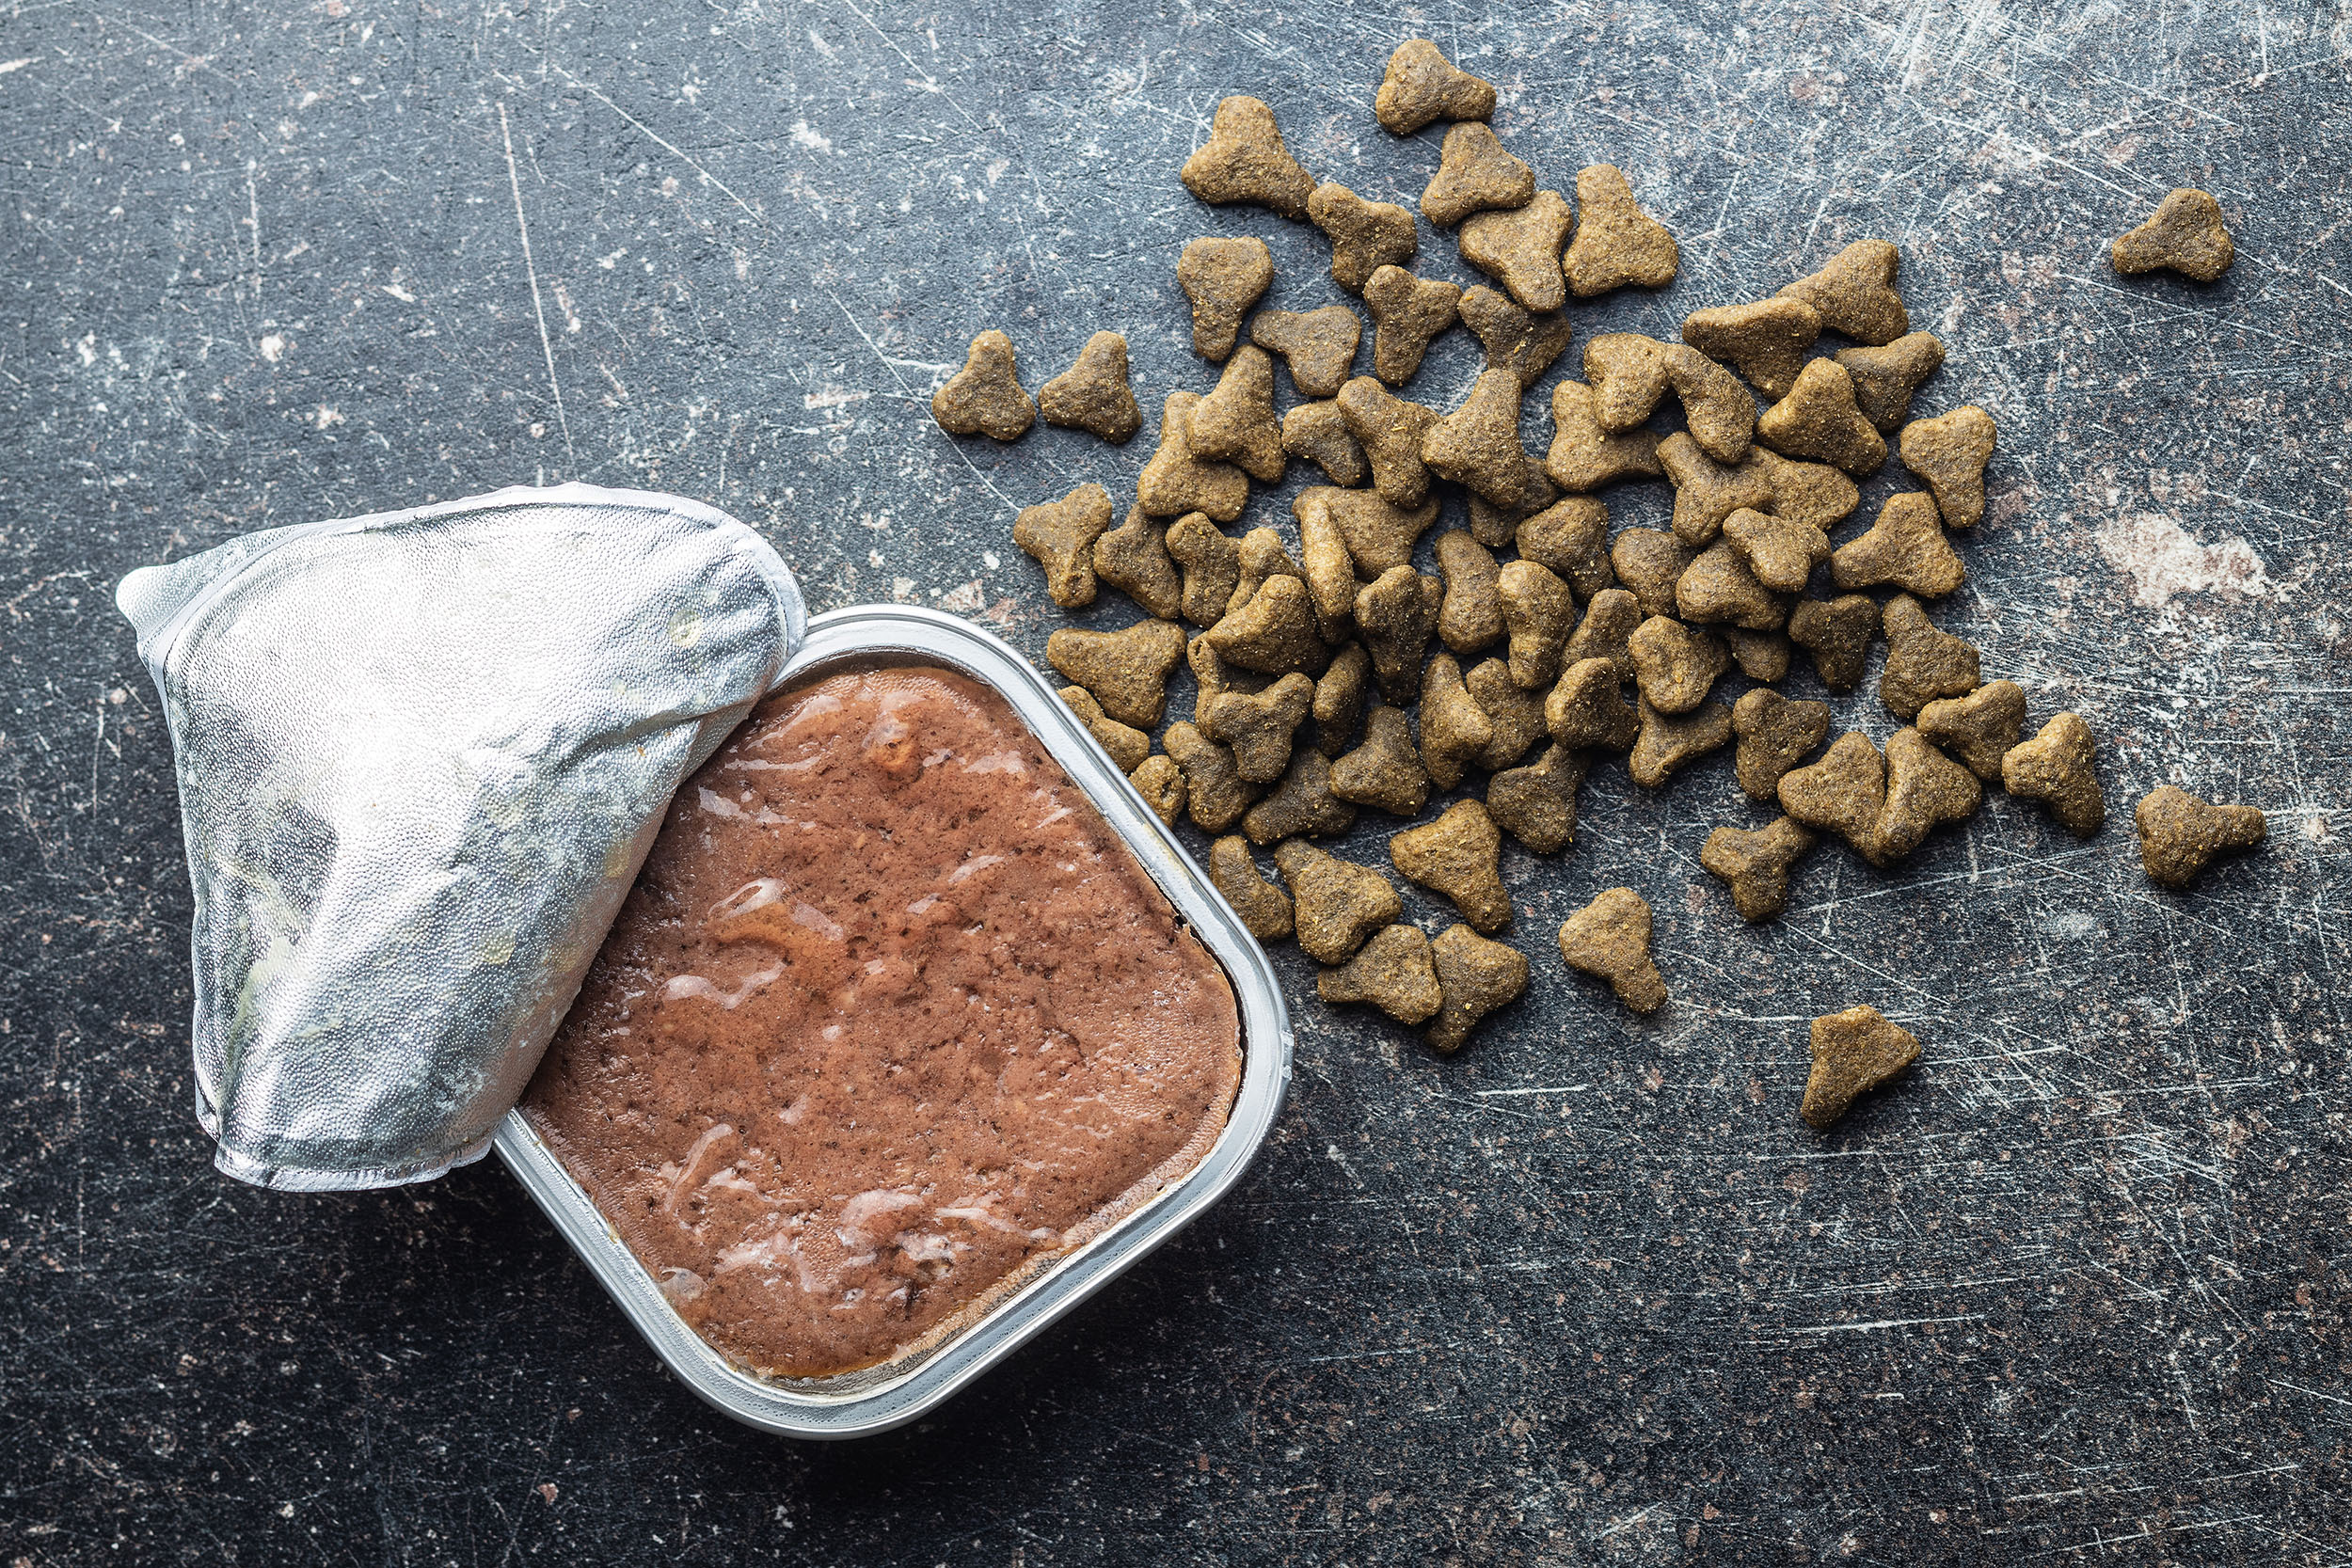 Dry Dog Food or Canned Food? Which is better?